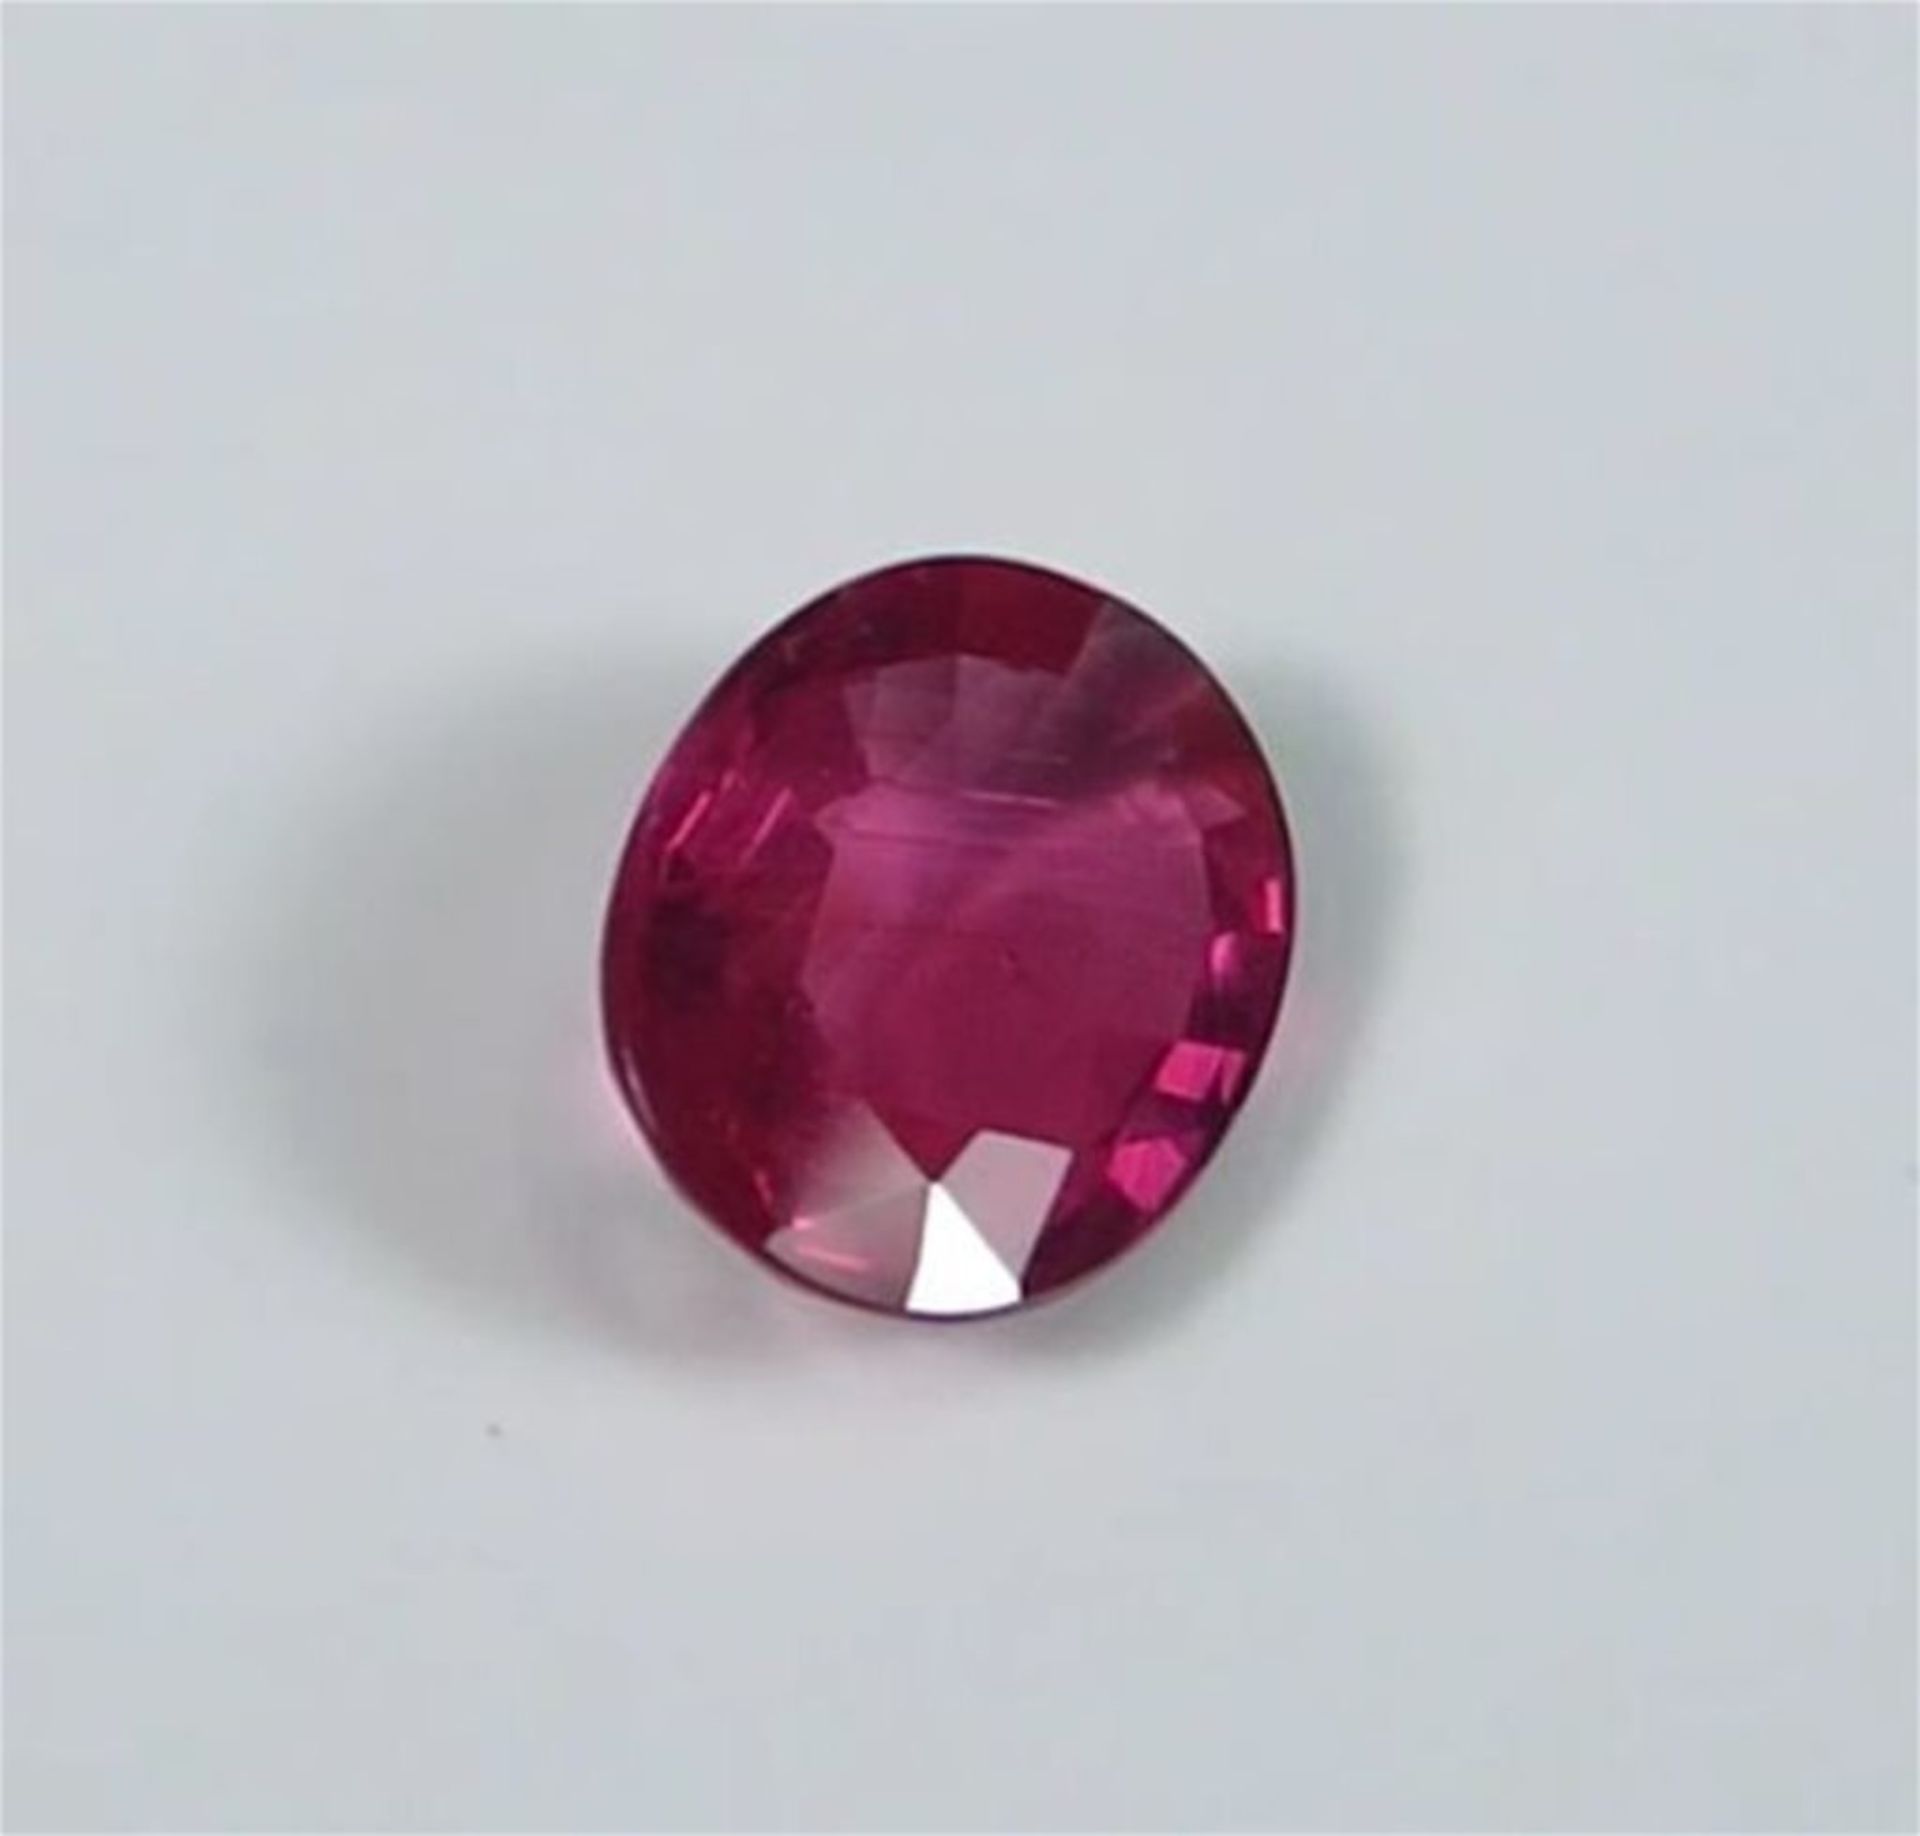 GIA Certified 1.22 ct. Untreated Ruby - BURMA - Image 5 of 10